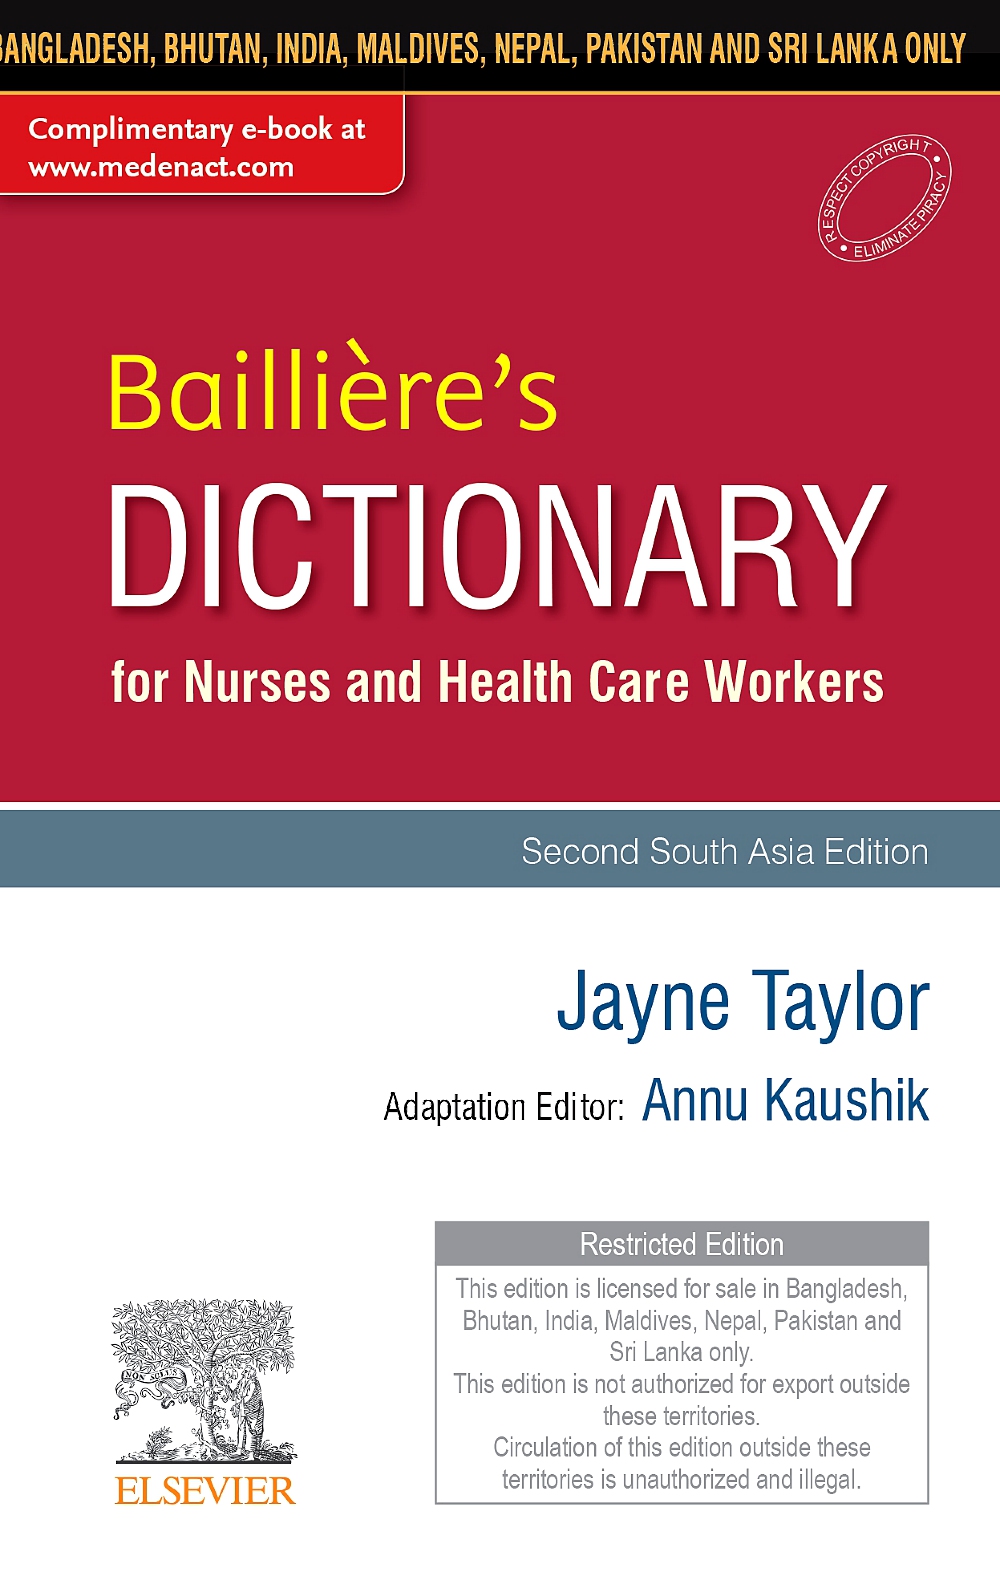 baillieres-nurses-dictionary-for-nurses-and-health-care-workers-second-south-asia-edition